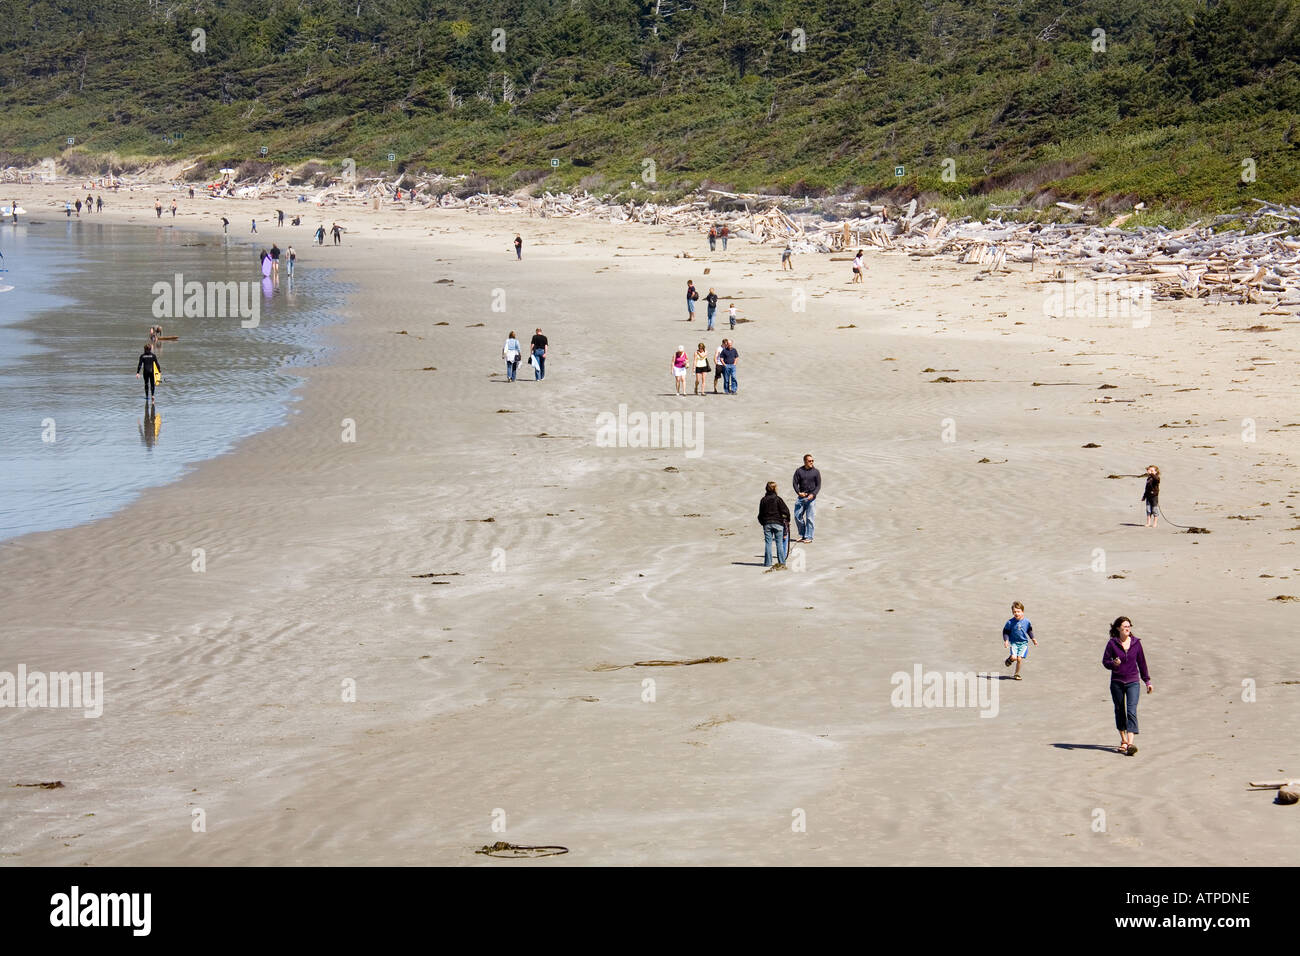 People walking on Wickanninish Beach Pacific Rim national park Vancouver island Canada Stock Photo